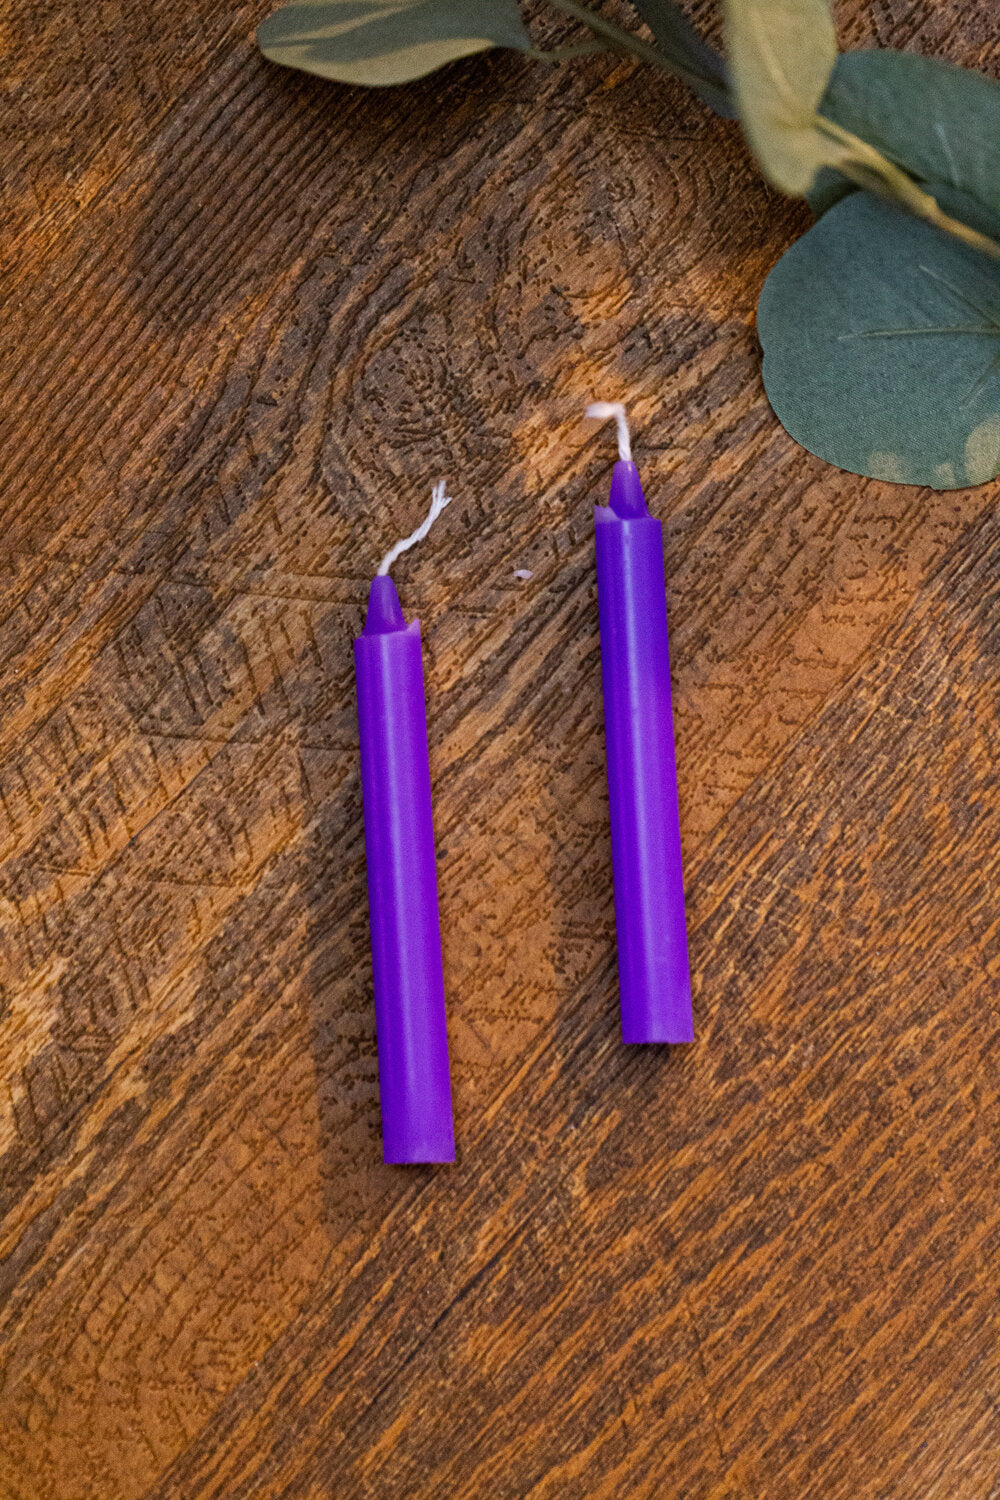 PURPLE Chime Candles for mental power, psychic power, protection, respect, victory, job interviews, Spirit Element